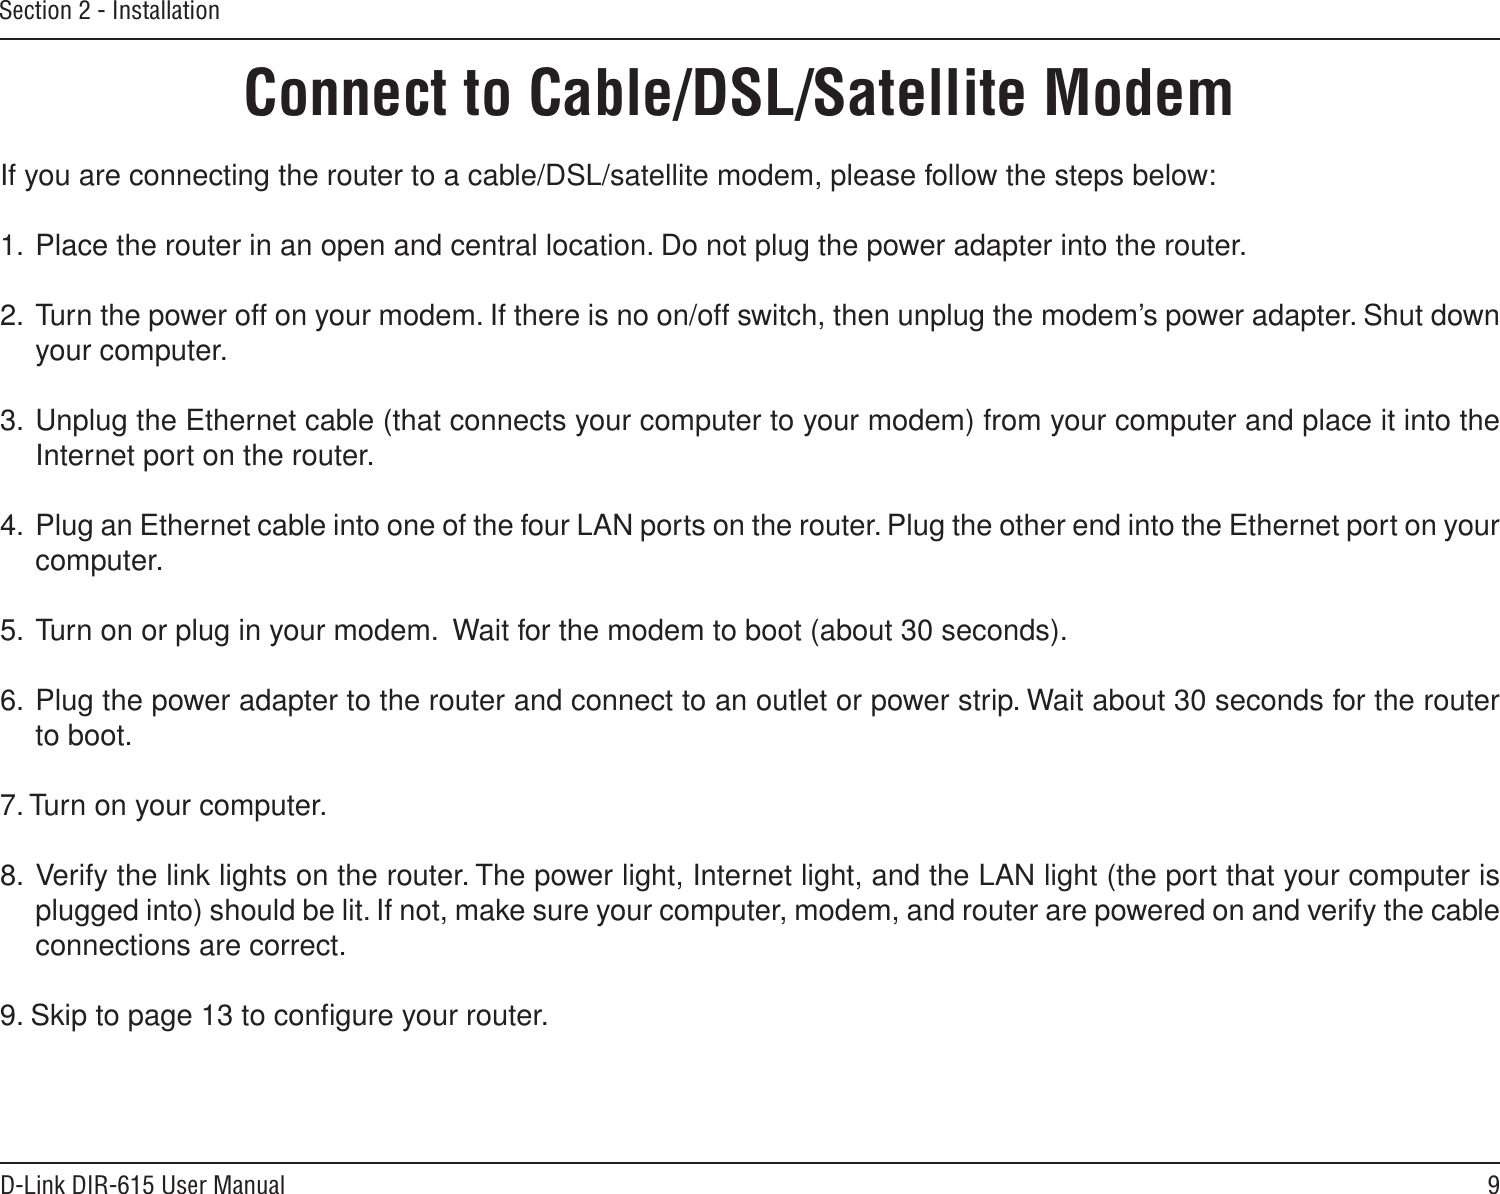 9D-Link DIR-615 User ManualSection 2 - InstallationIf you are connecting the router to a cable/DSL/satellite modem, please follow the steps below:1.  Place the router in an open and central location. Do not plug the power adapter into the router. 2.  Turn the power off on your modem. If there is no on/off switch, then unplug the modem’s power adapter. Shut down your computer.3.  Unplug the Ethernet cable (that connects your computer to your modem) from your computer and place it into the Internet port on the router.  4.  Plug an Ethernet cable into one of the four LAN ports on the router. Plug the other end into the Ethernet port on your computer.5.  Turn on or plug in your modem.  Wait for the modem to boot (about 30 seconds). 6.  Plug the power adapter to the router and connect to an outlet or power strip. Wait about 30 seconds for the router to boot. 7. Turn on your computer. 8.  Verify the link lights on the router. The power light, Internet light, and the LAN light (the port that your computer is plugged into) should be lit. If not, make sure your computer, modem, and router are powered on and verify the cable connections are correct. 9. Skip to page 13 to conﬁgure your router. Connect to Cable/DSL/Satellite Modem